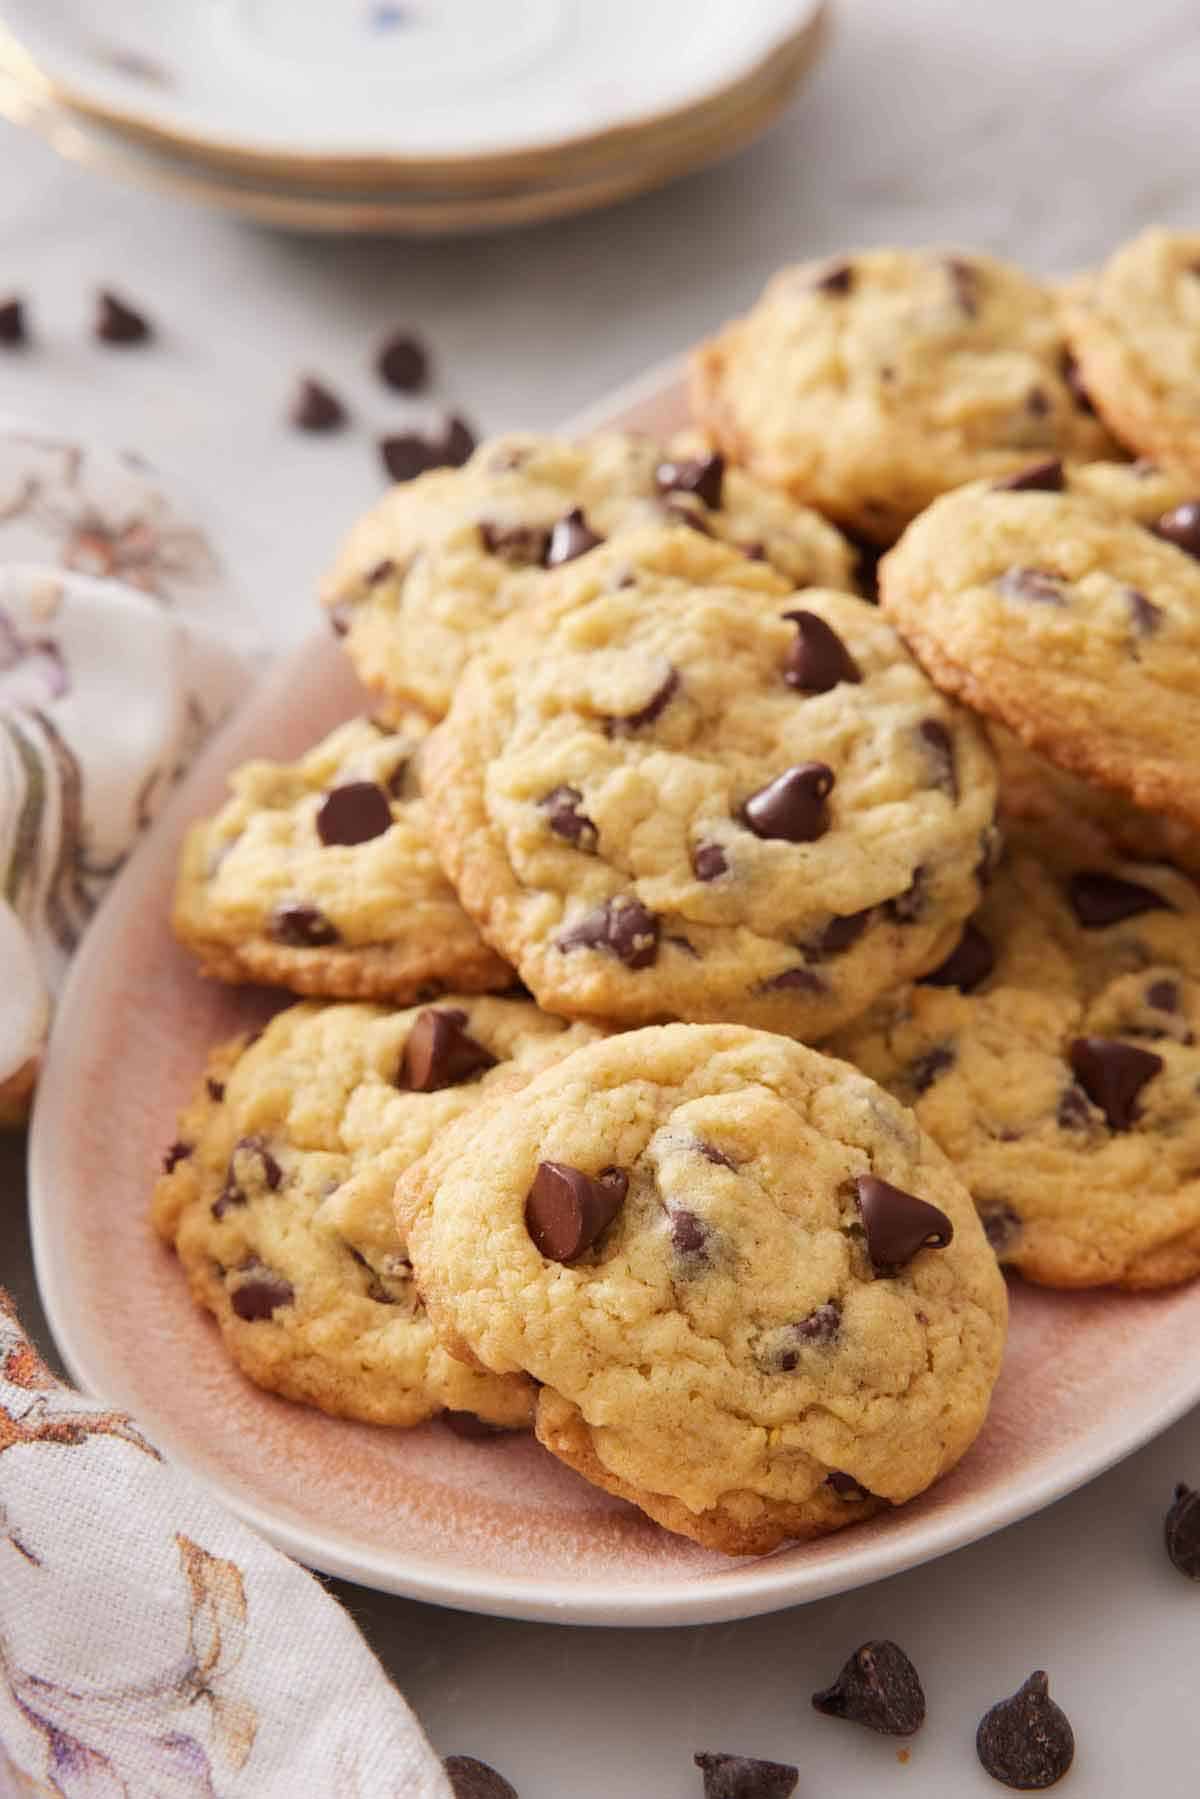 A platter of pudding cookies with some chocolate chips scattered around and a stack of plates in the background.